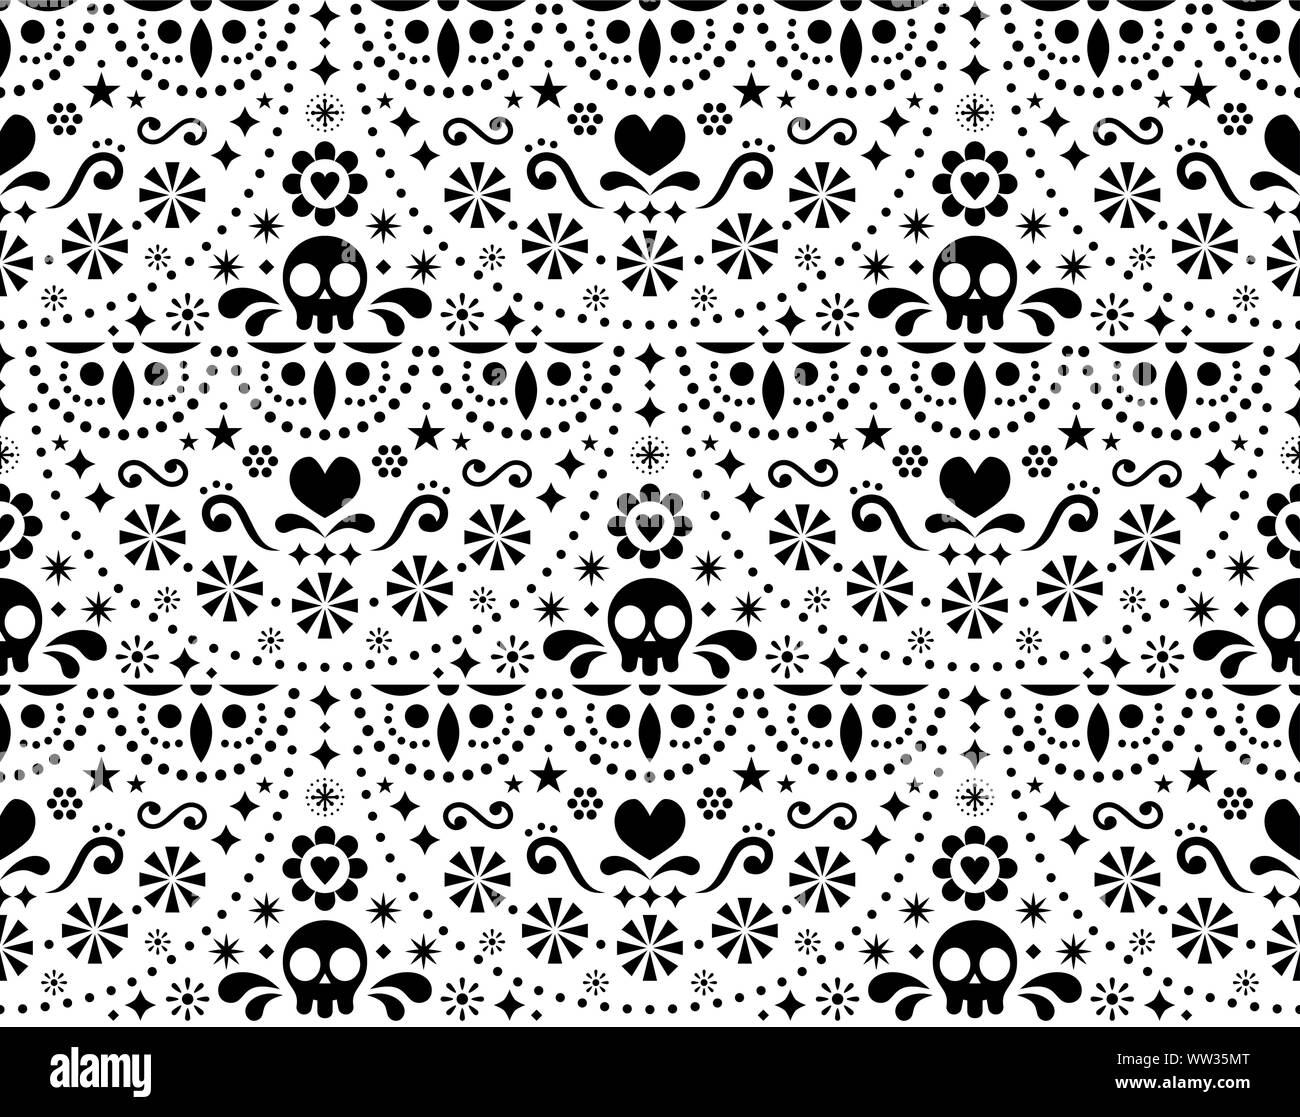 Mexican folk art vector seamless pattern with skulls, Halloween decor, flowers and abstract shapes, black and white textile design Stock Vector